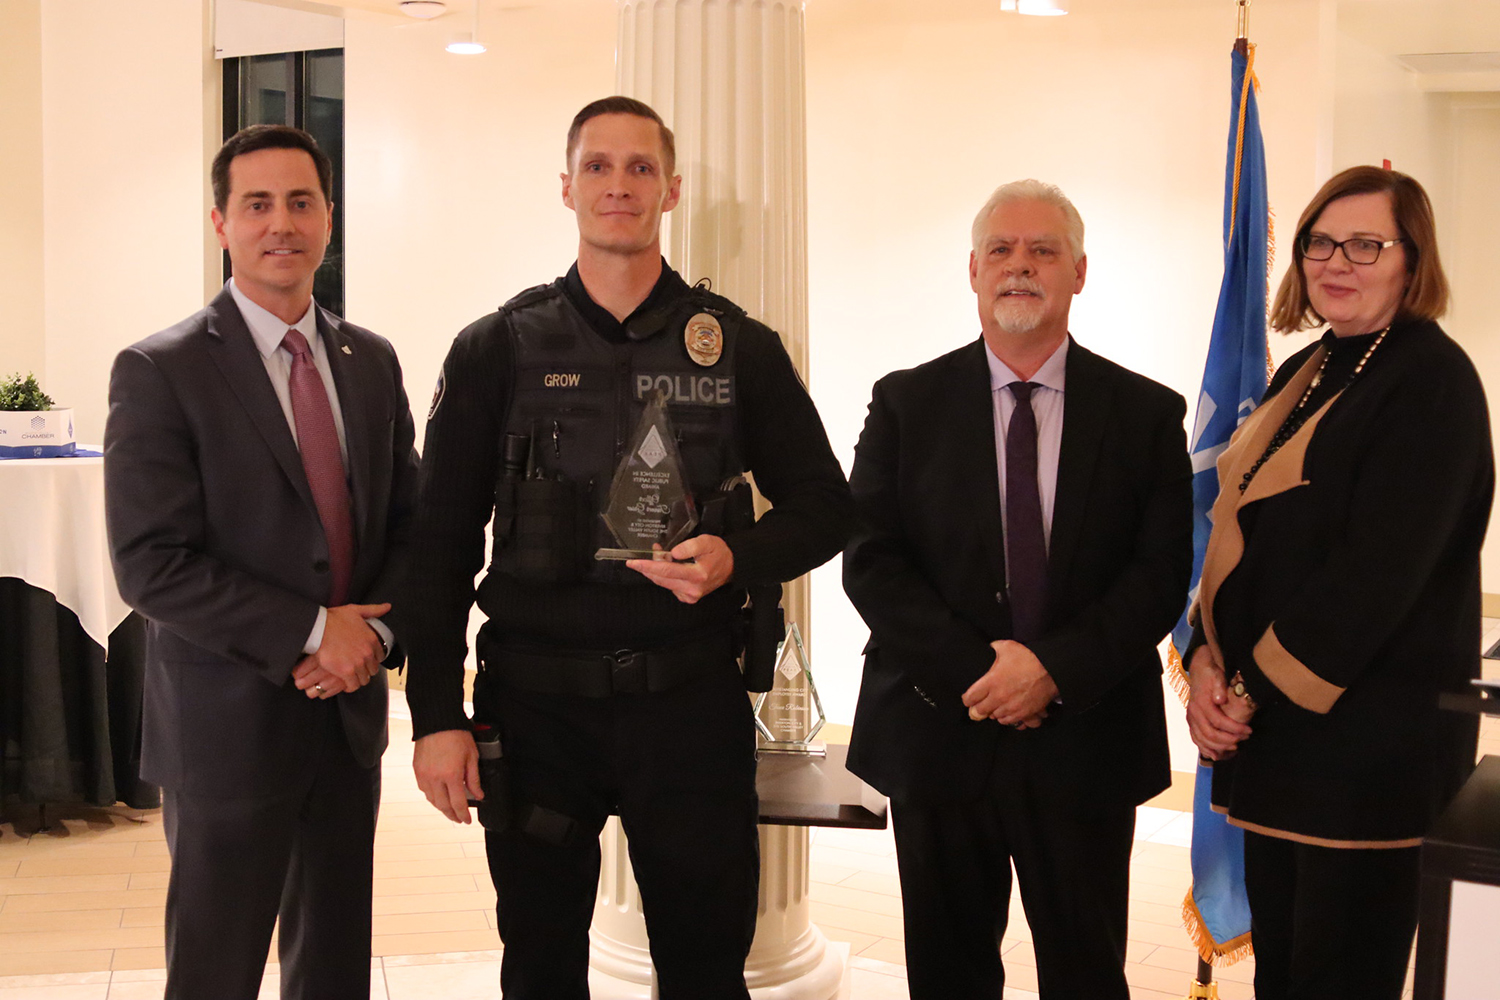 Excellence in Public Safety Award: Officer Tanner Grow